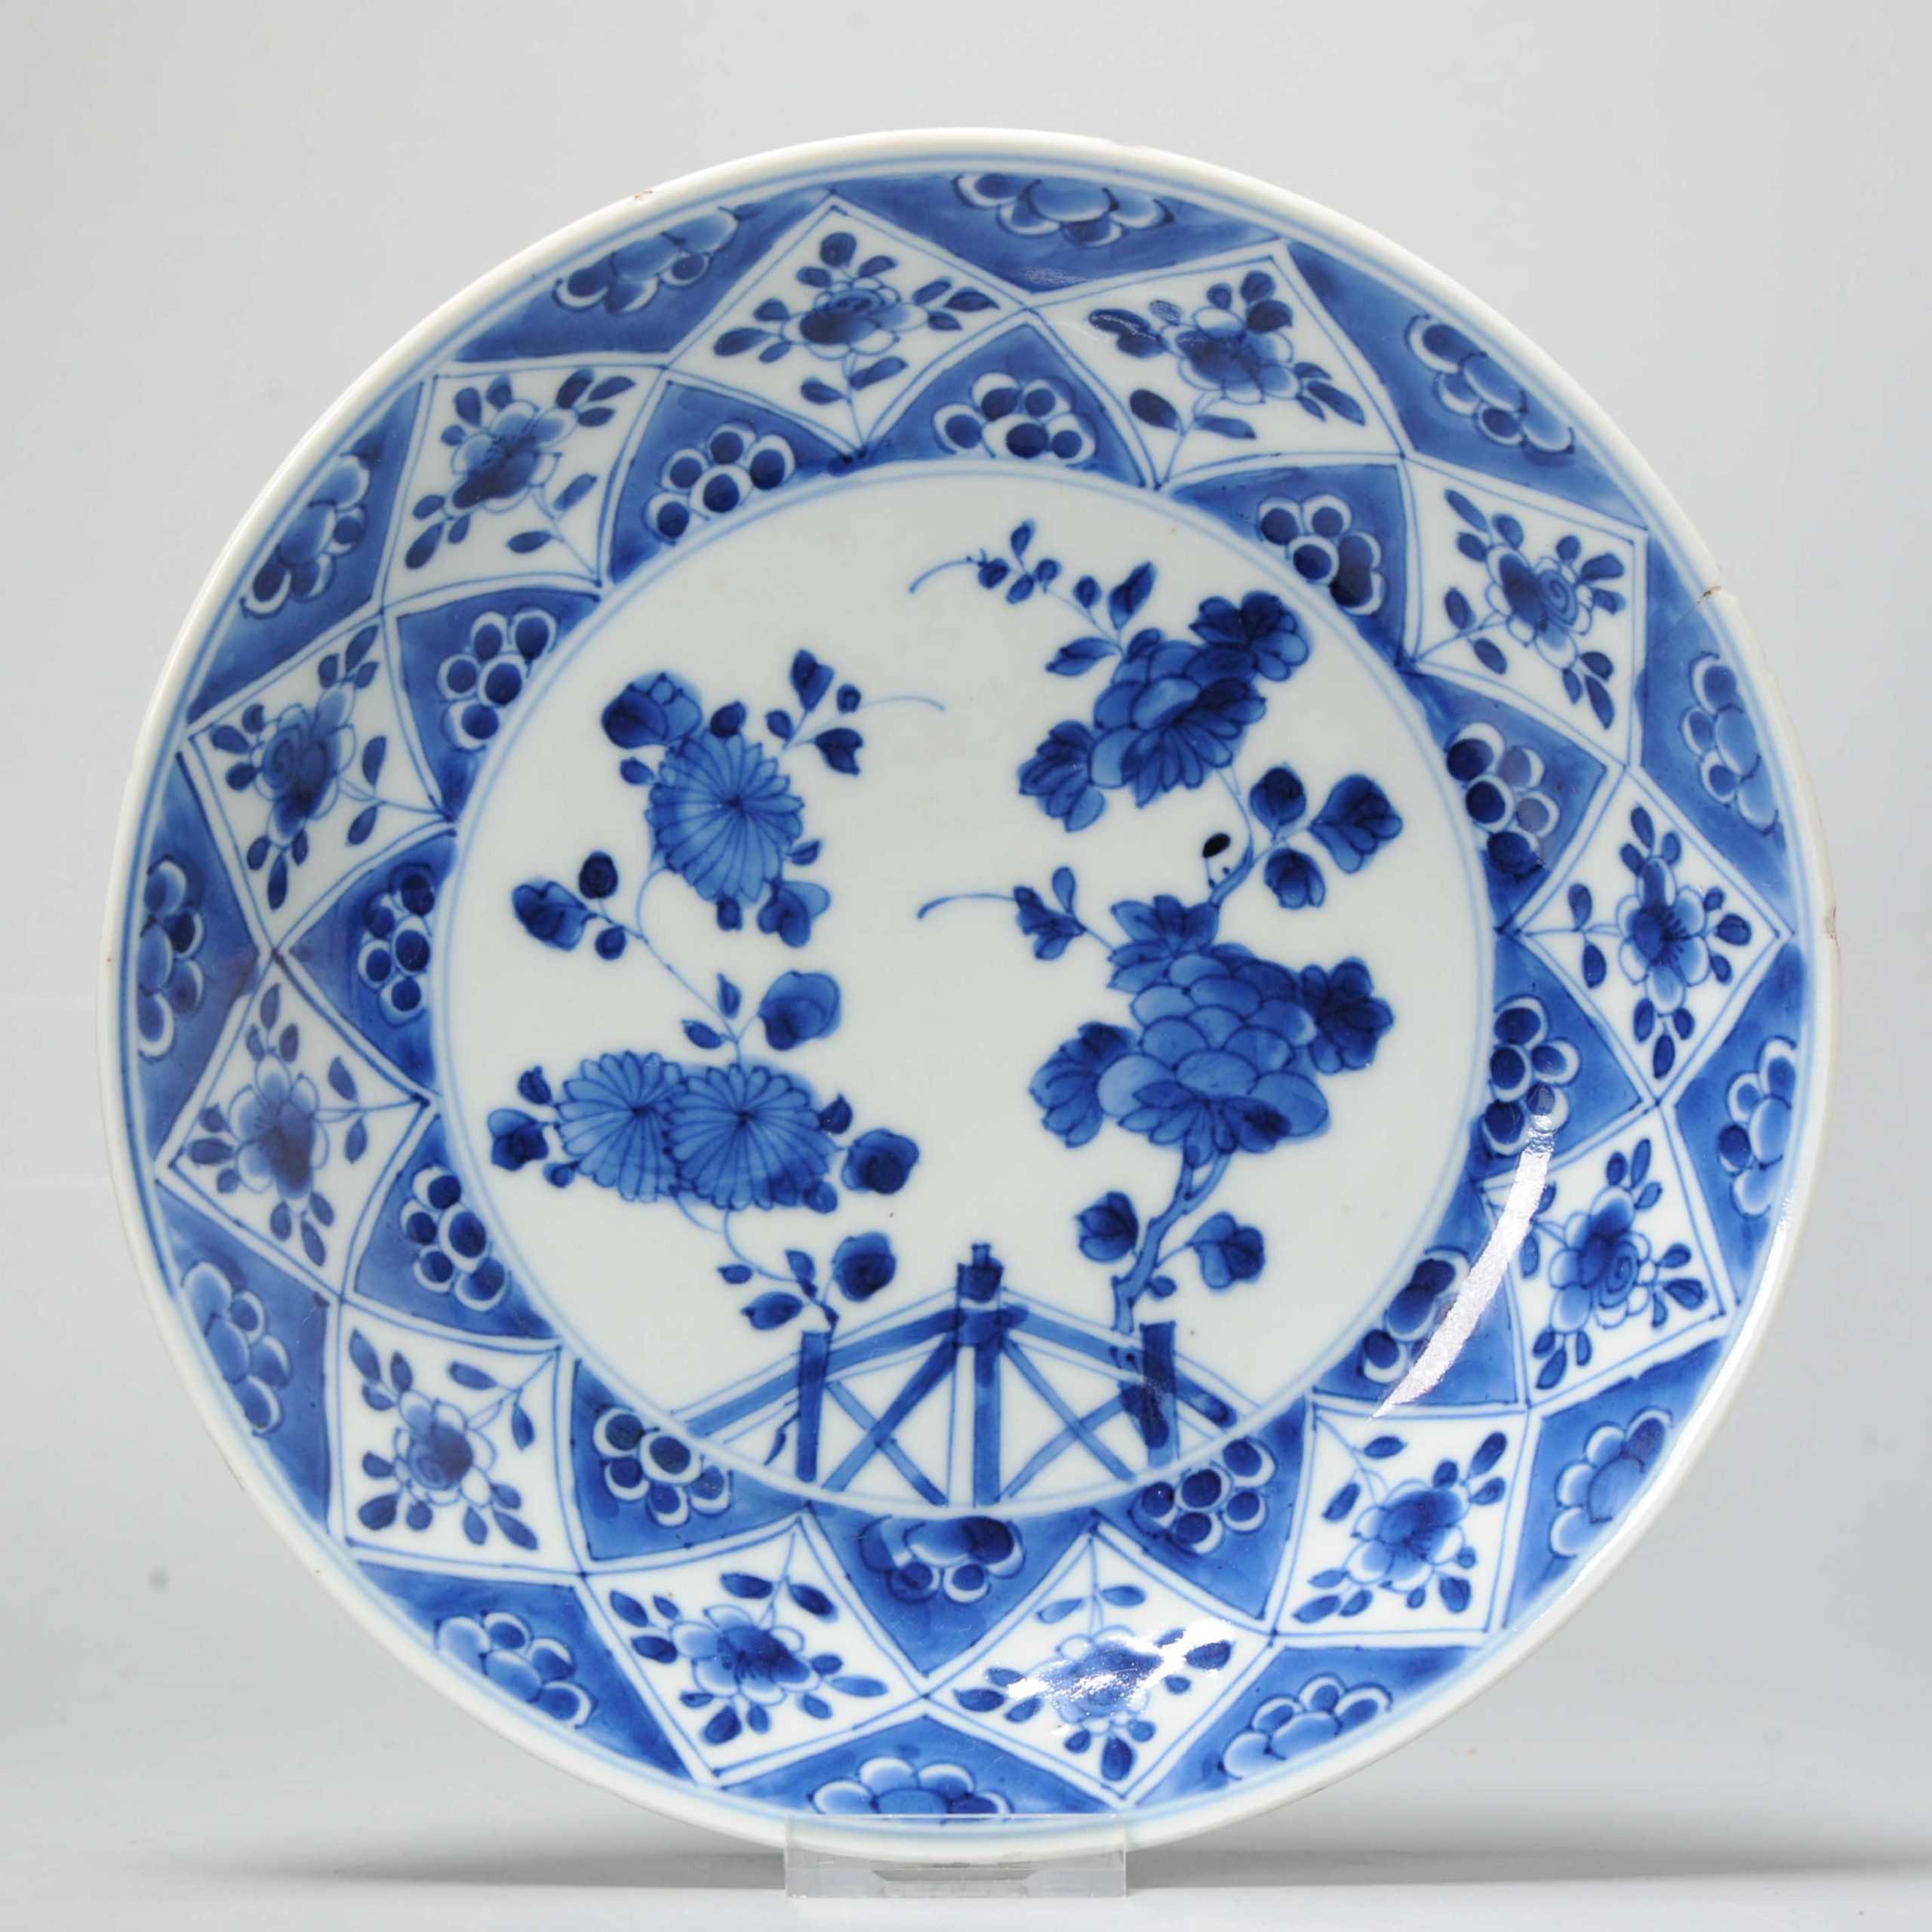 0990 A nice thin Kangxi plate with flowers chrysanthemum and other flowers